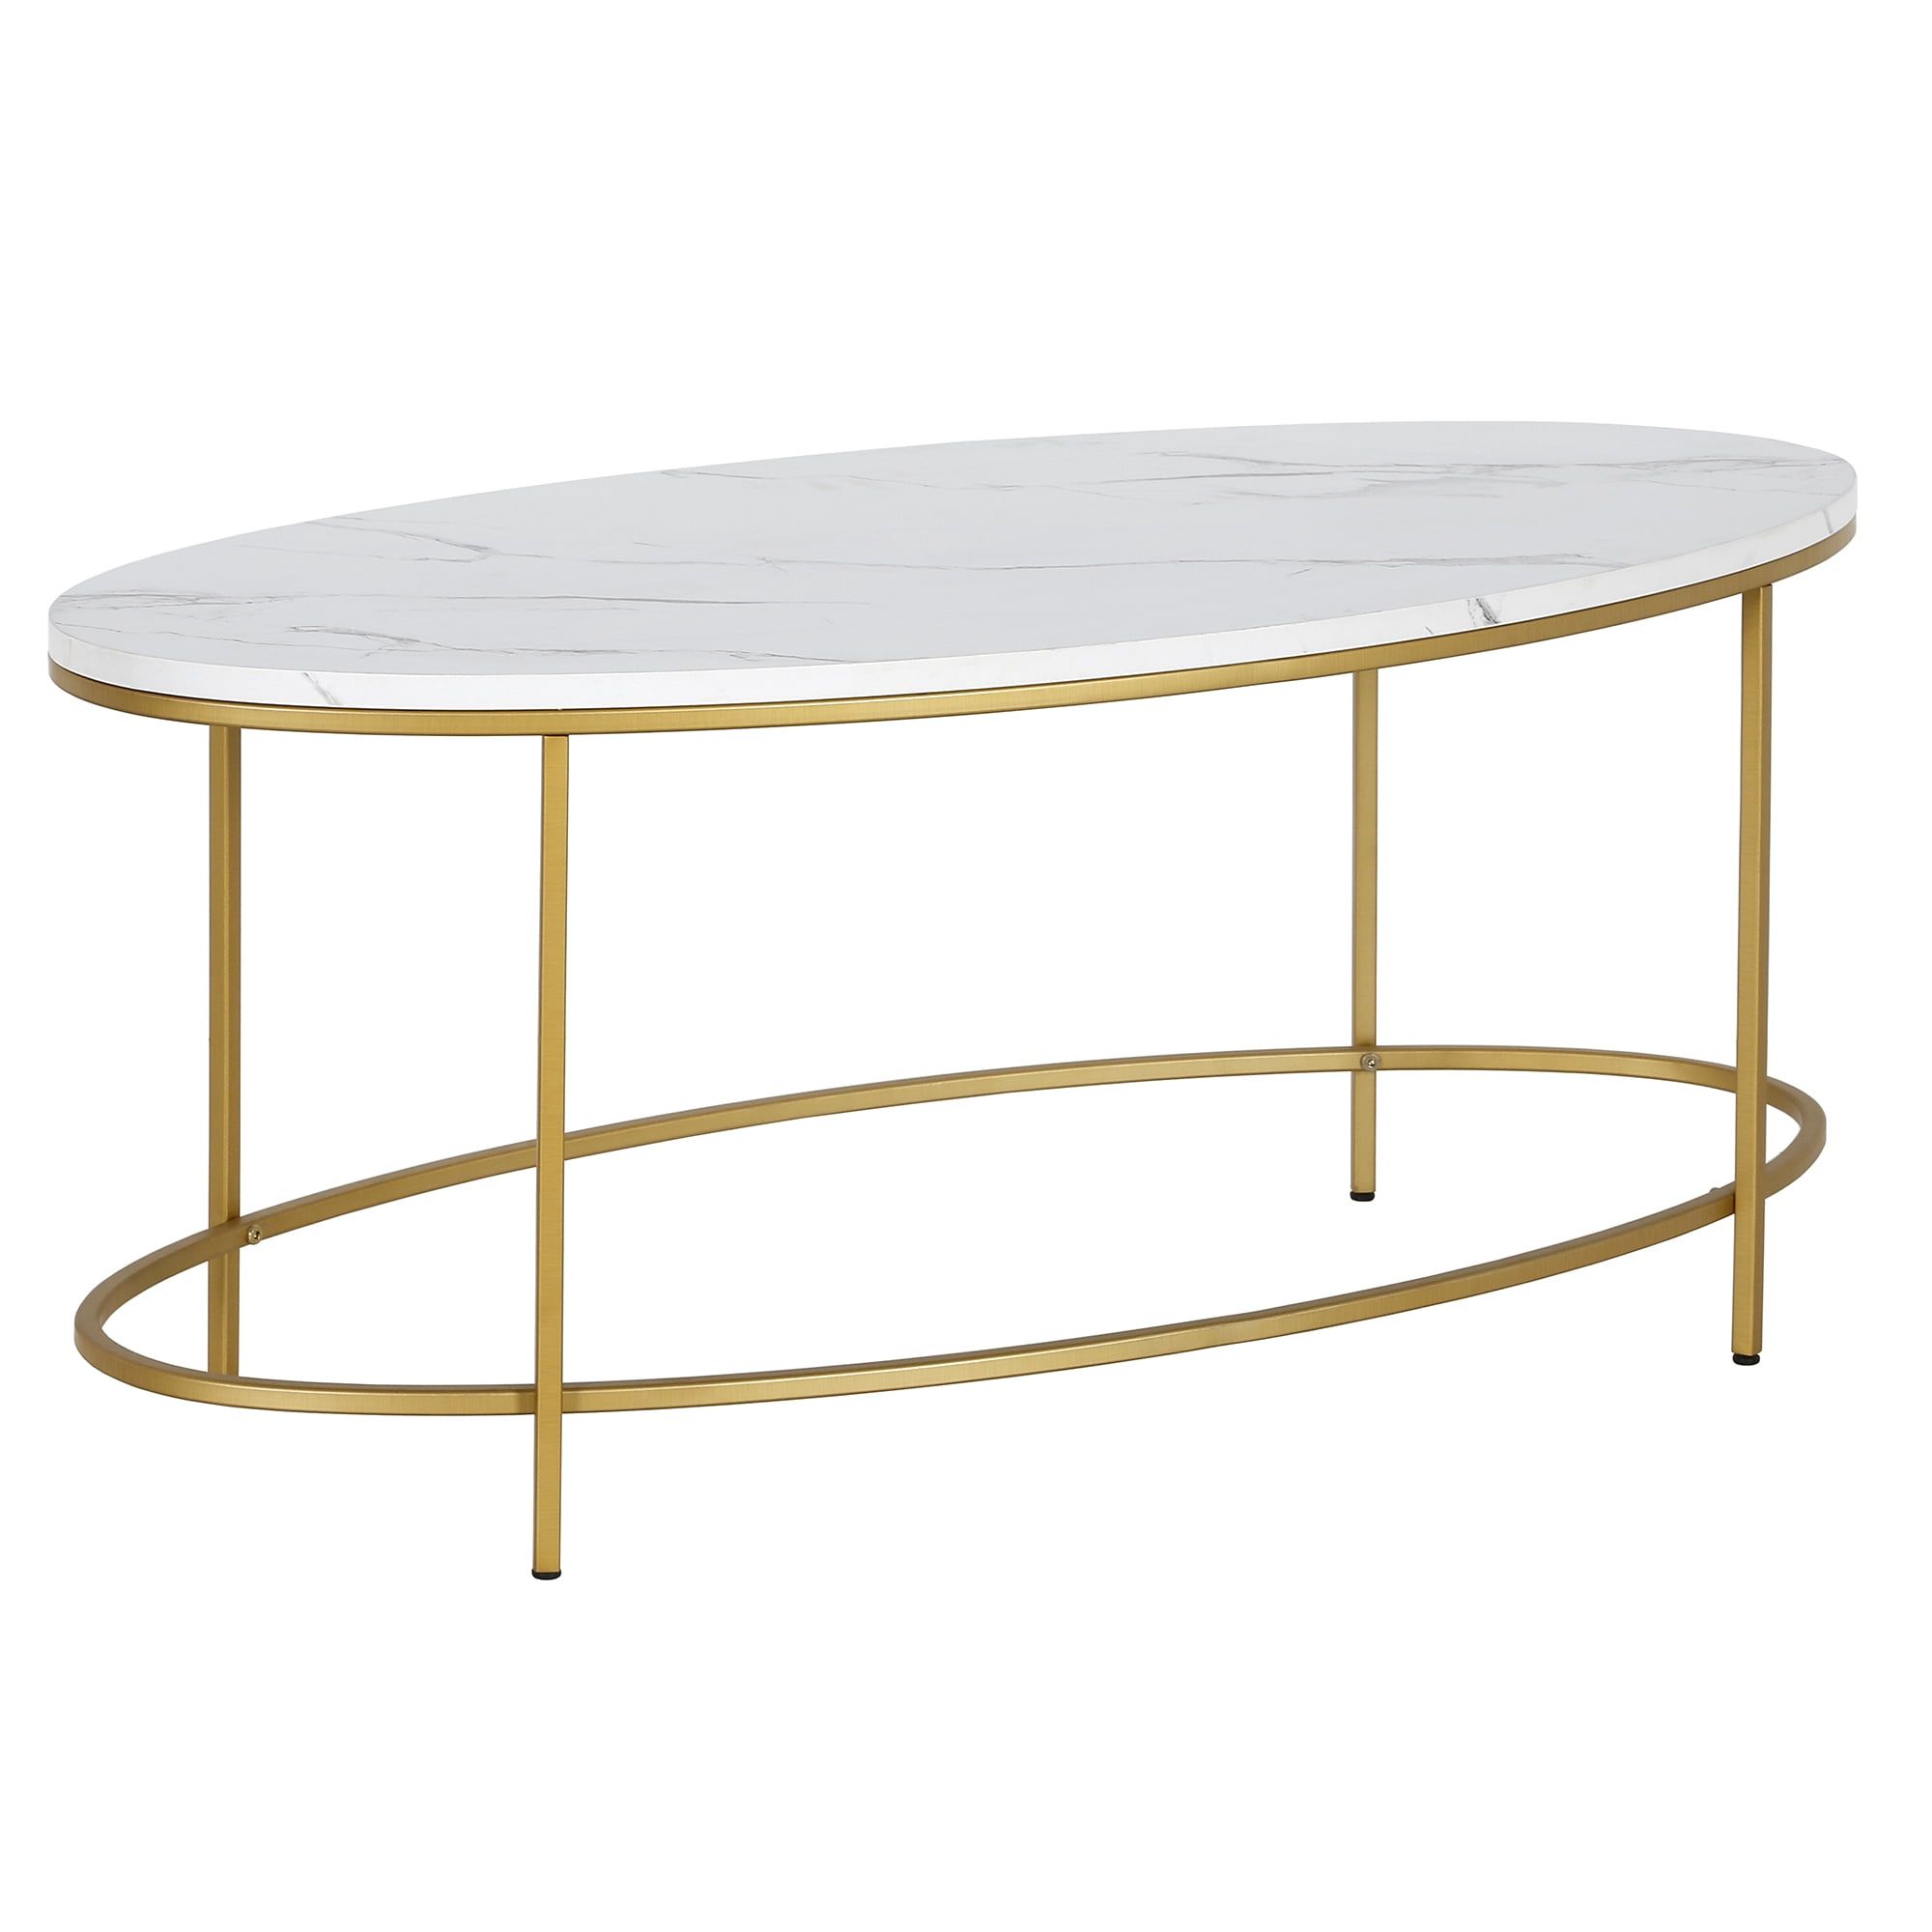 Addison&lane Francesca Coffee Table – Walmart Pertaining To Addison&lane Calix Square Tables (Gallery 9 of 20)